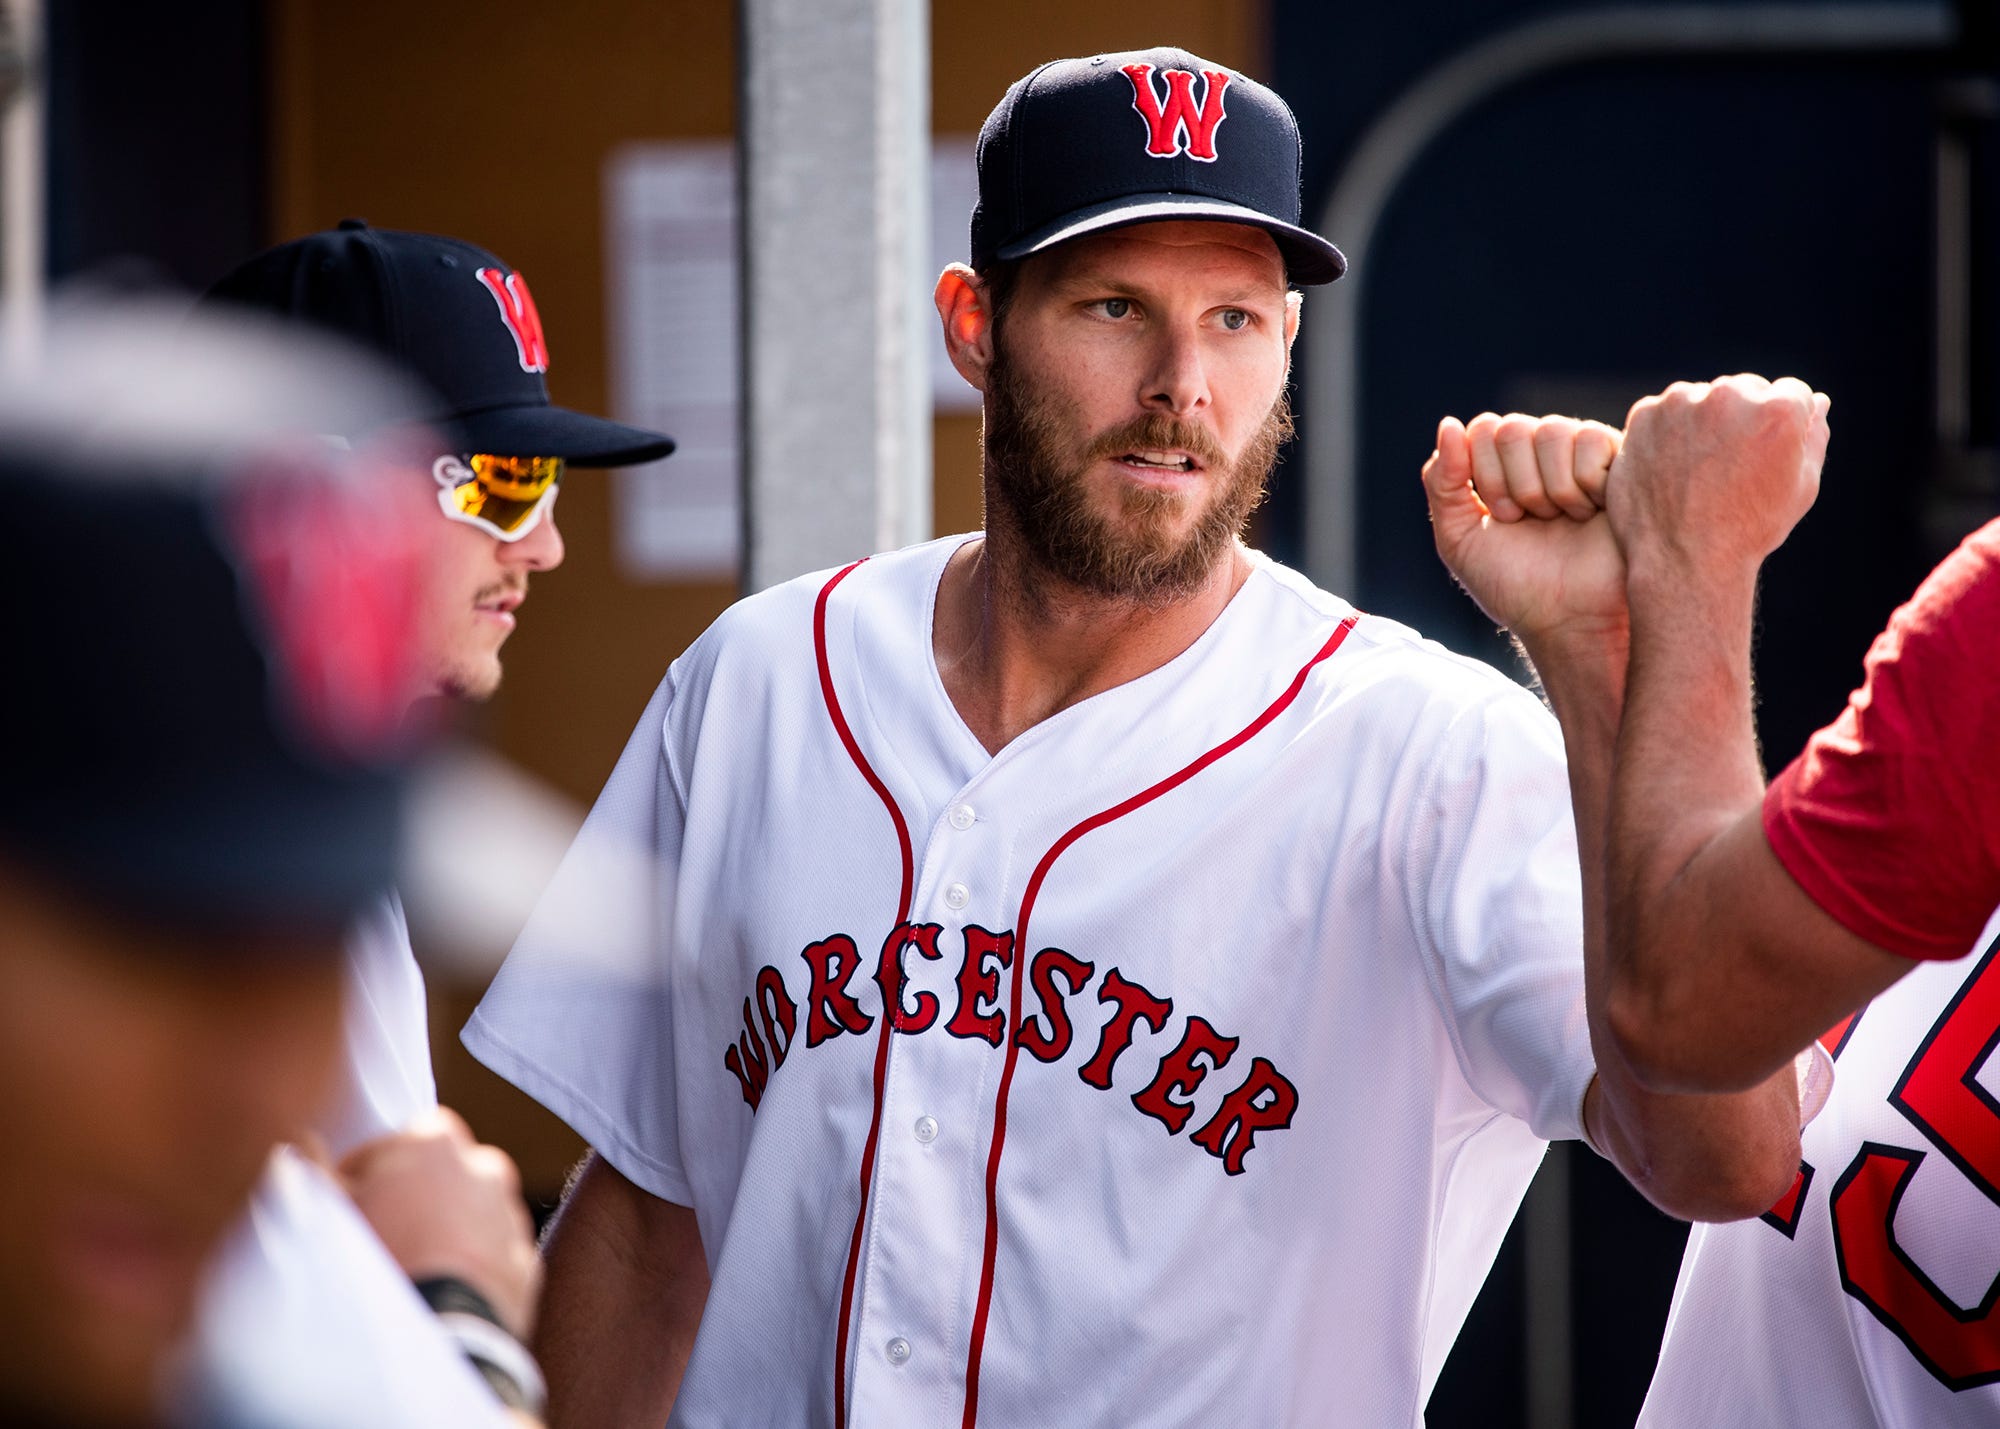 spiraal Bully Contract Chris Sale Worcester Red Sox WooSox rehab pitching Boston  Scranton/Wilkes-Barre RailRiders